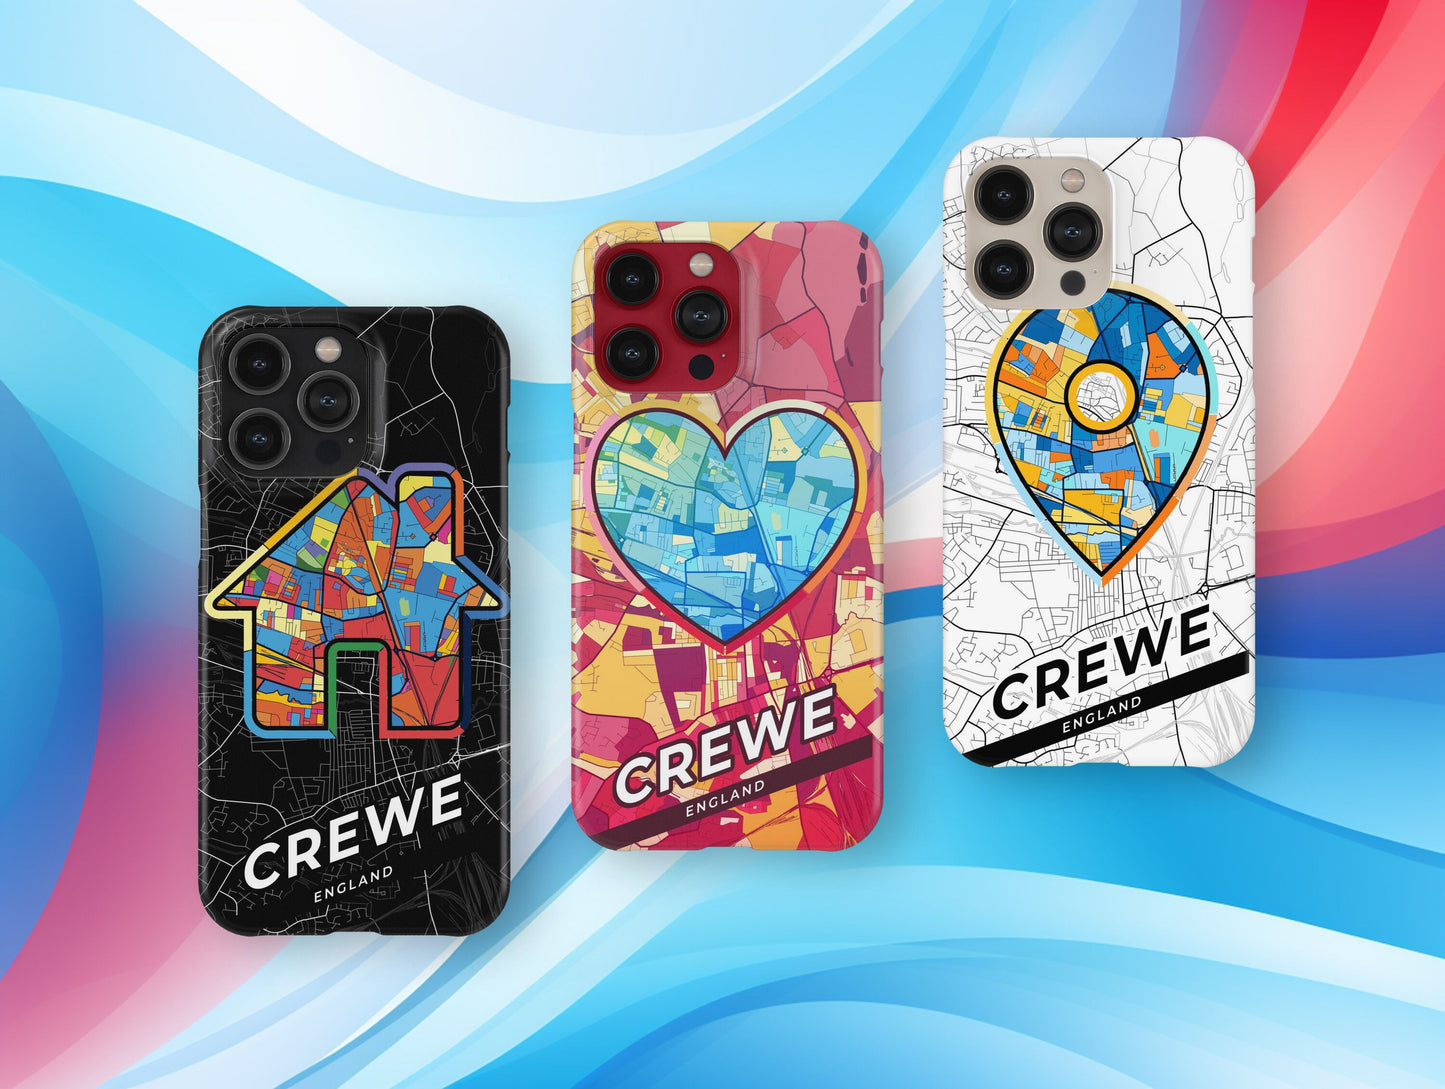 Crewe England slim phone case with colorful icon. Birthday, wedding or housewarming gift. Couple match cases.